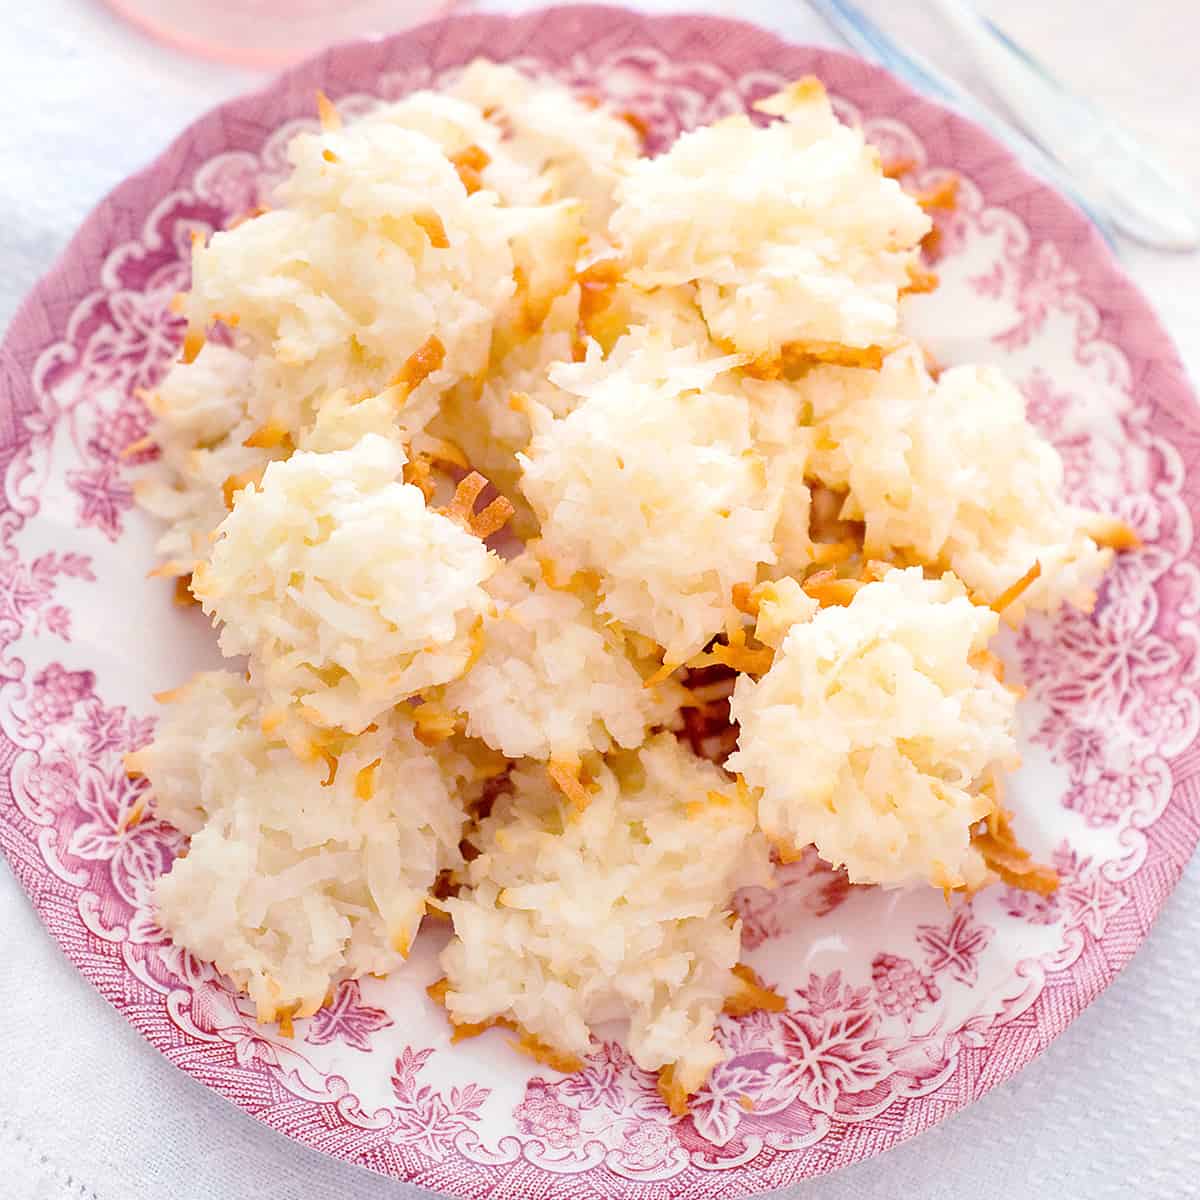 Coconut macaroons on a pink and white serving plate.